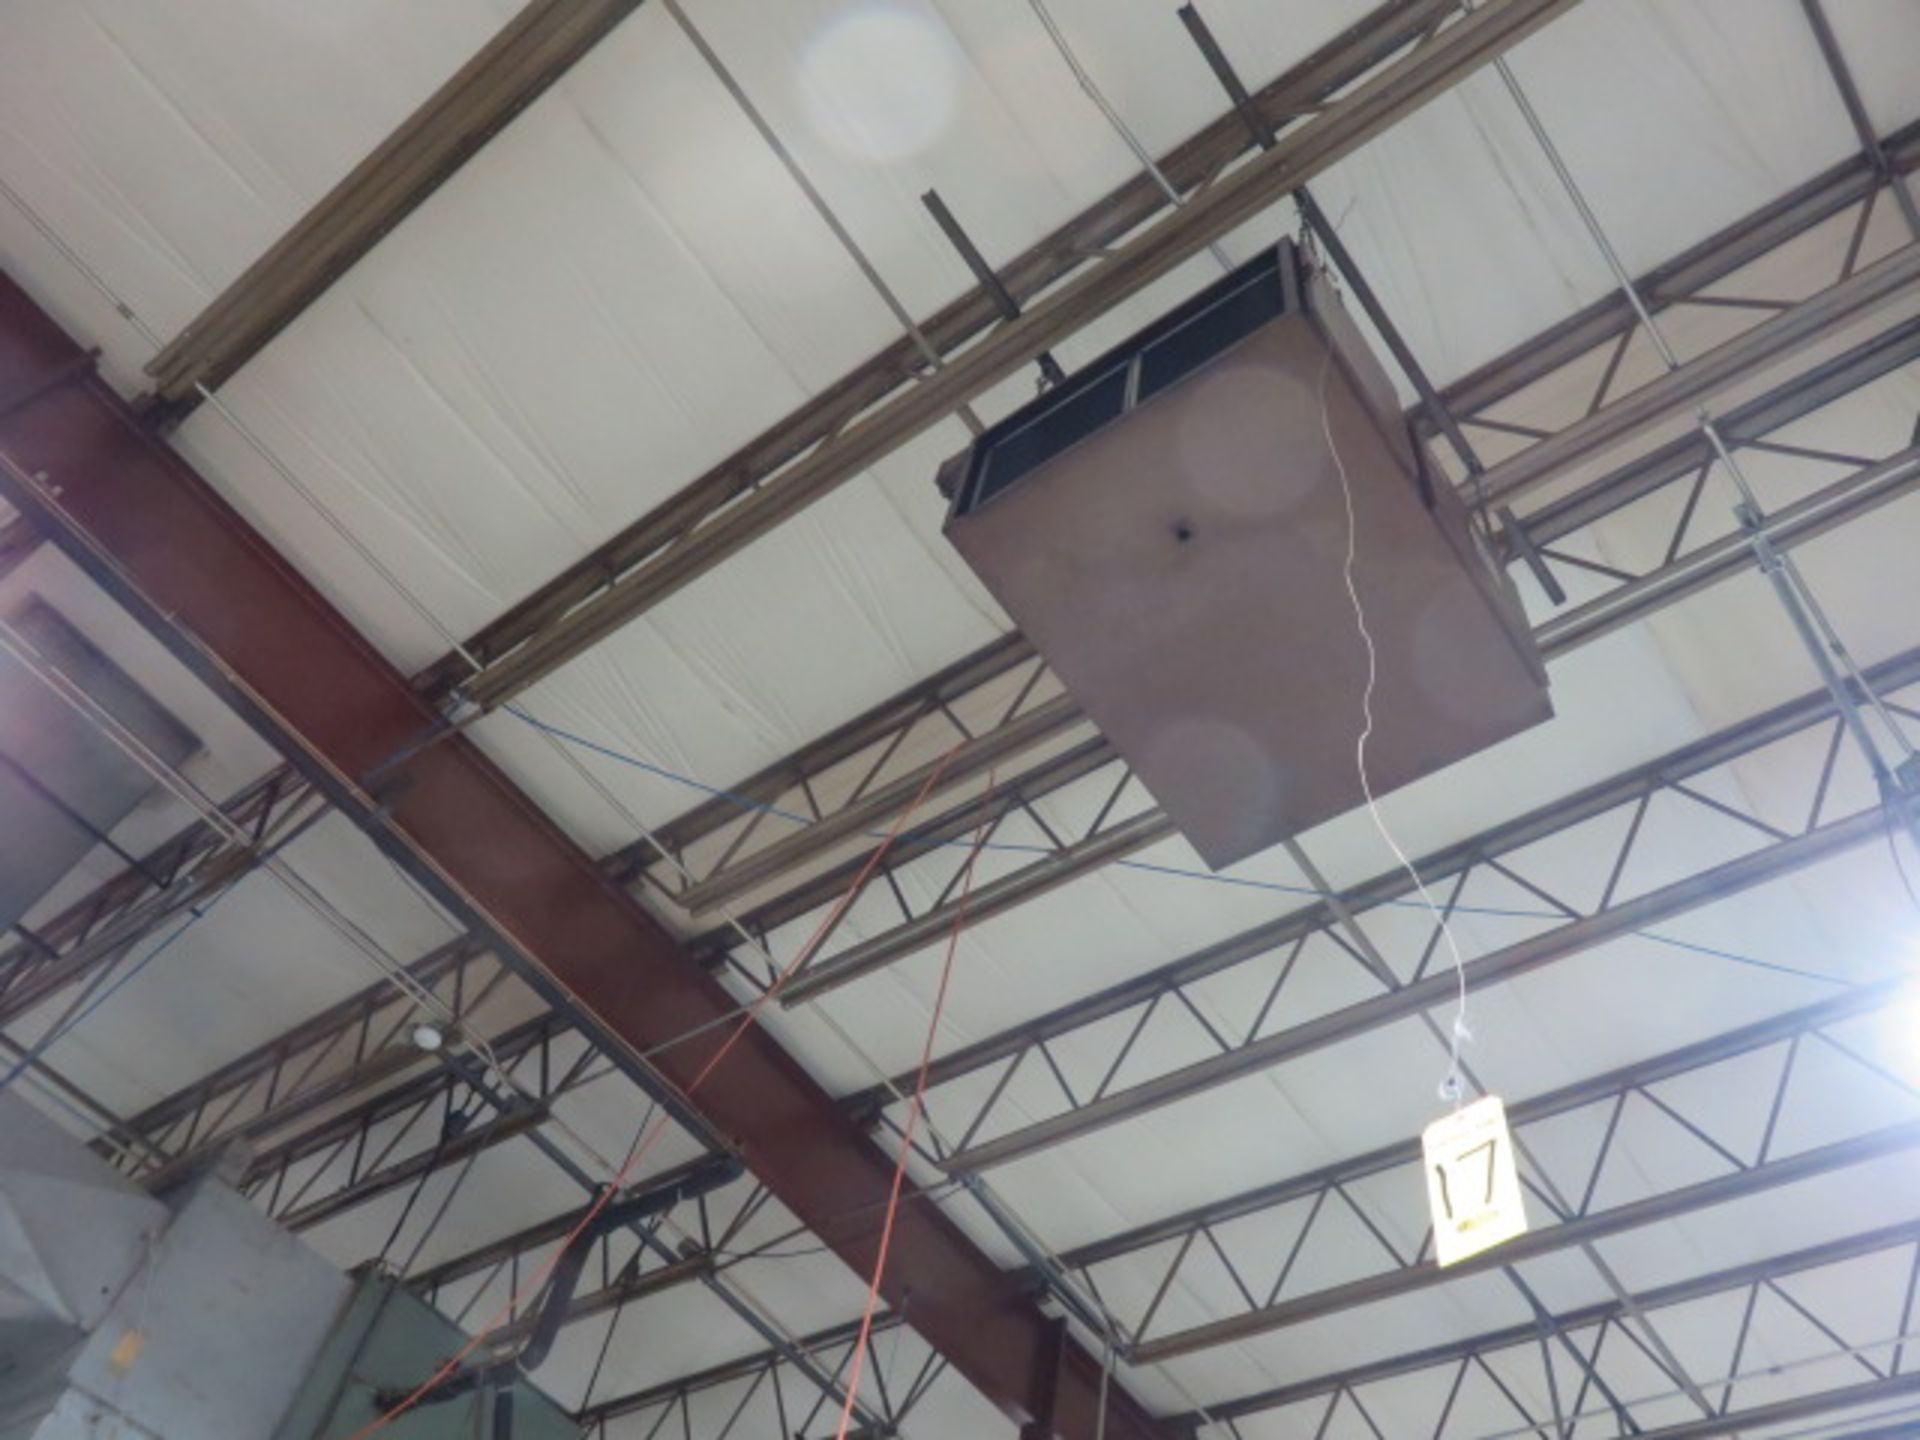 SMOG-HOG AIR CLEANER, MDL. SH-20-PE (SUSPENDED FROM THE CEILING)